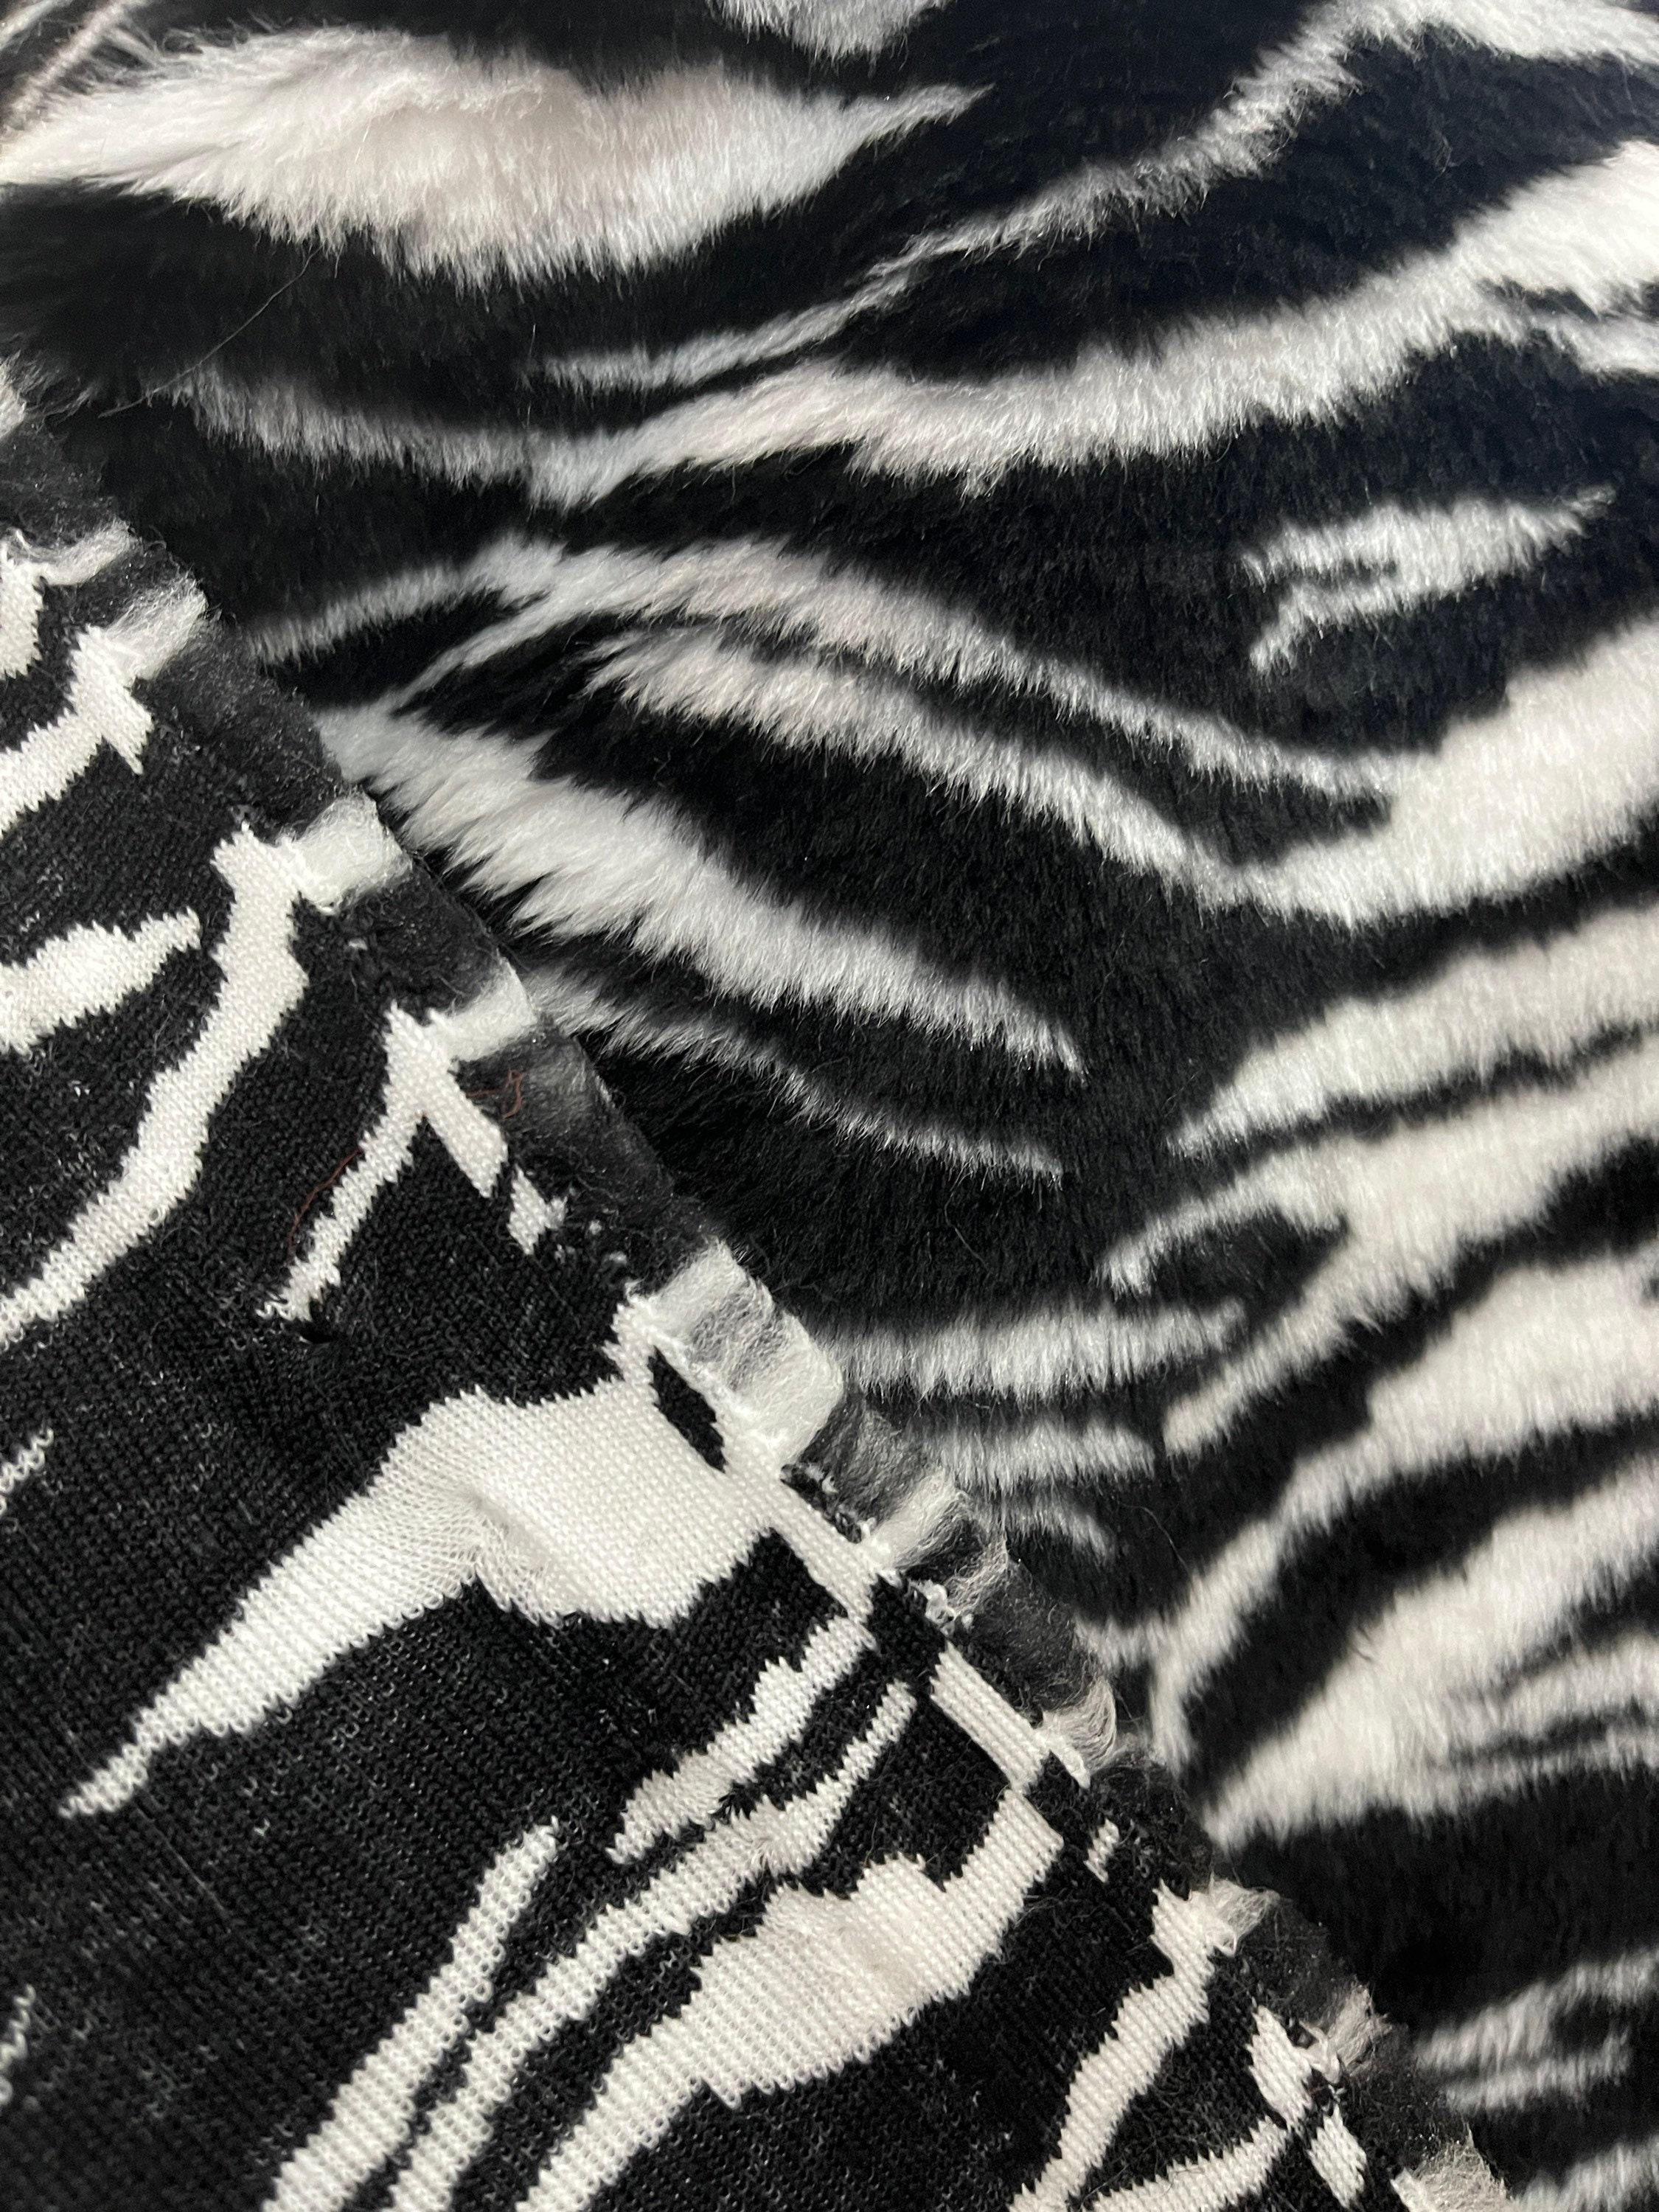 Nicole Miller Zebra Beanie and Scarf Set Os / Black and White Zebra Accessories Cold Weather Accessories